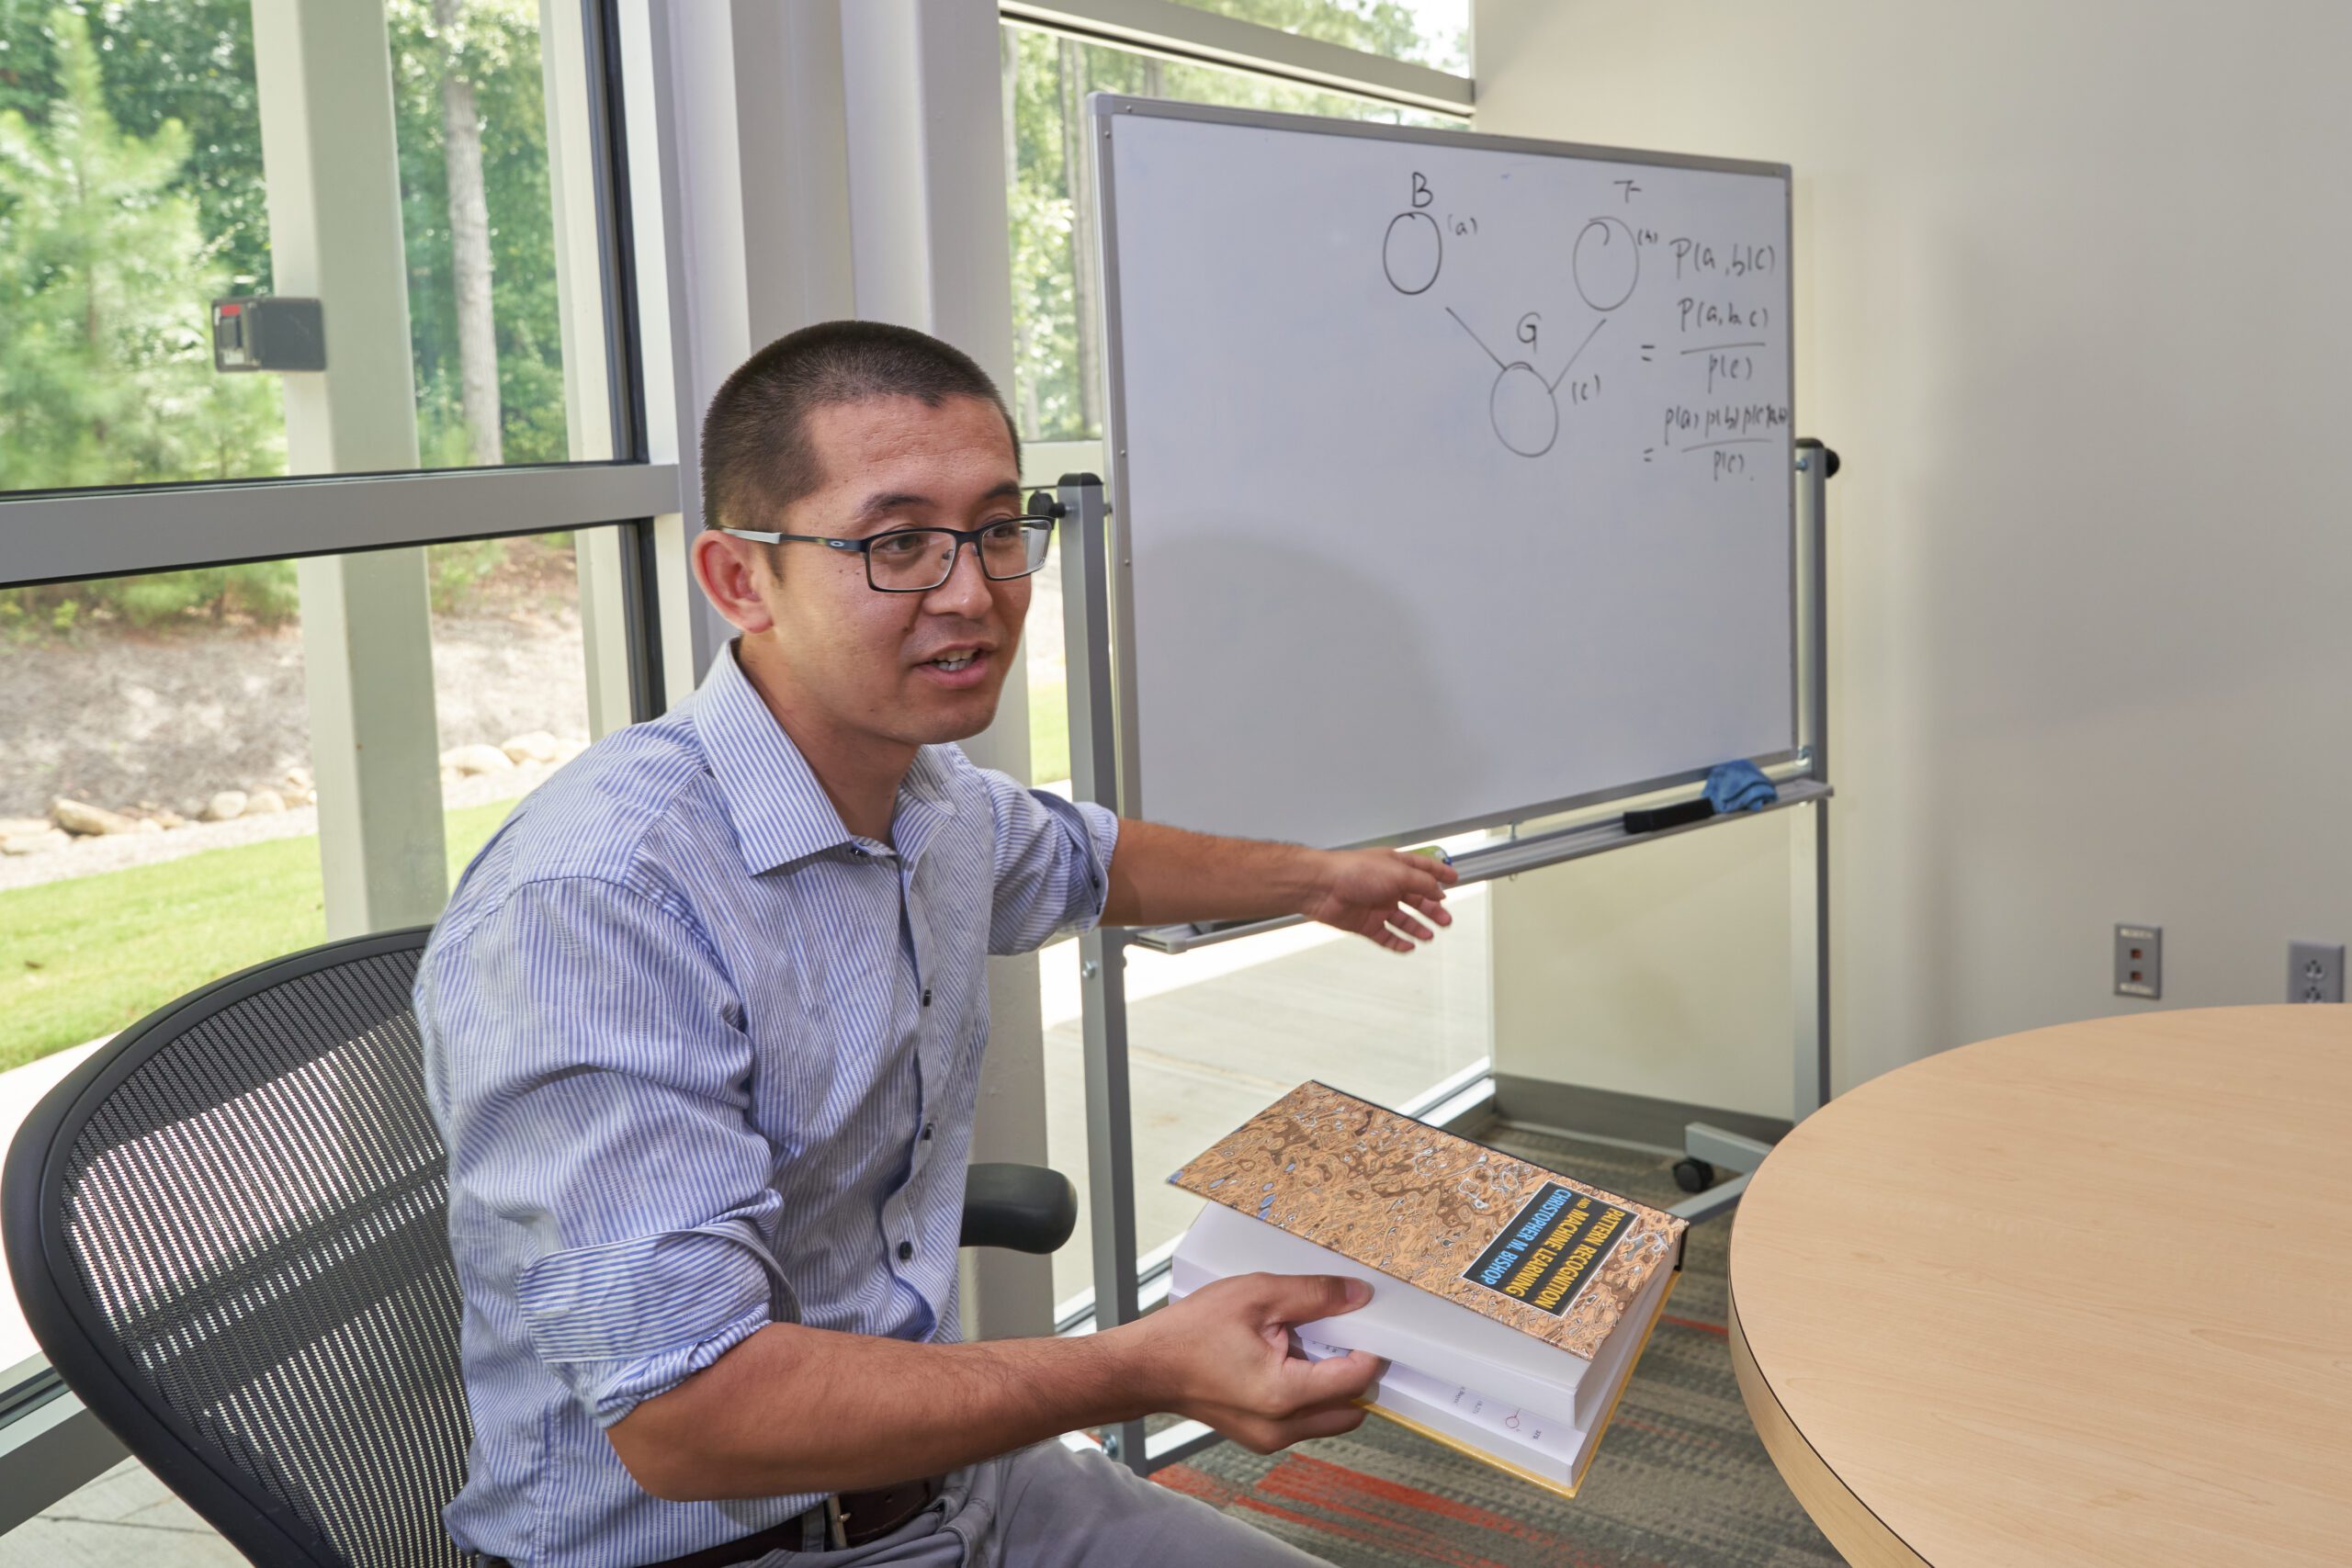 A man wearing glasses points at a whiteboard while holding a book